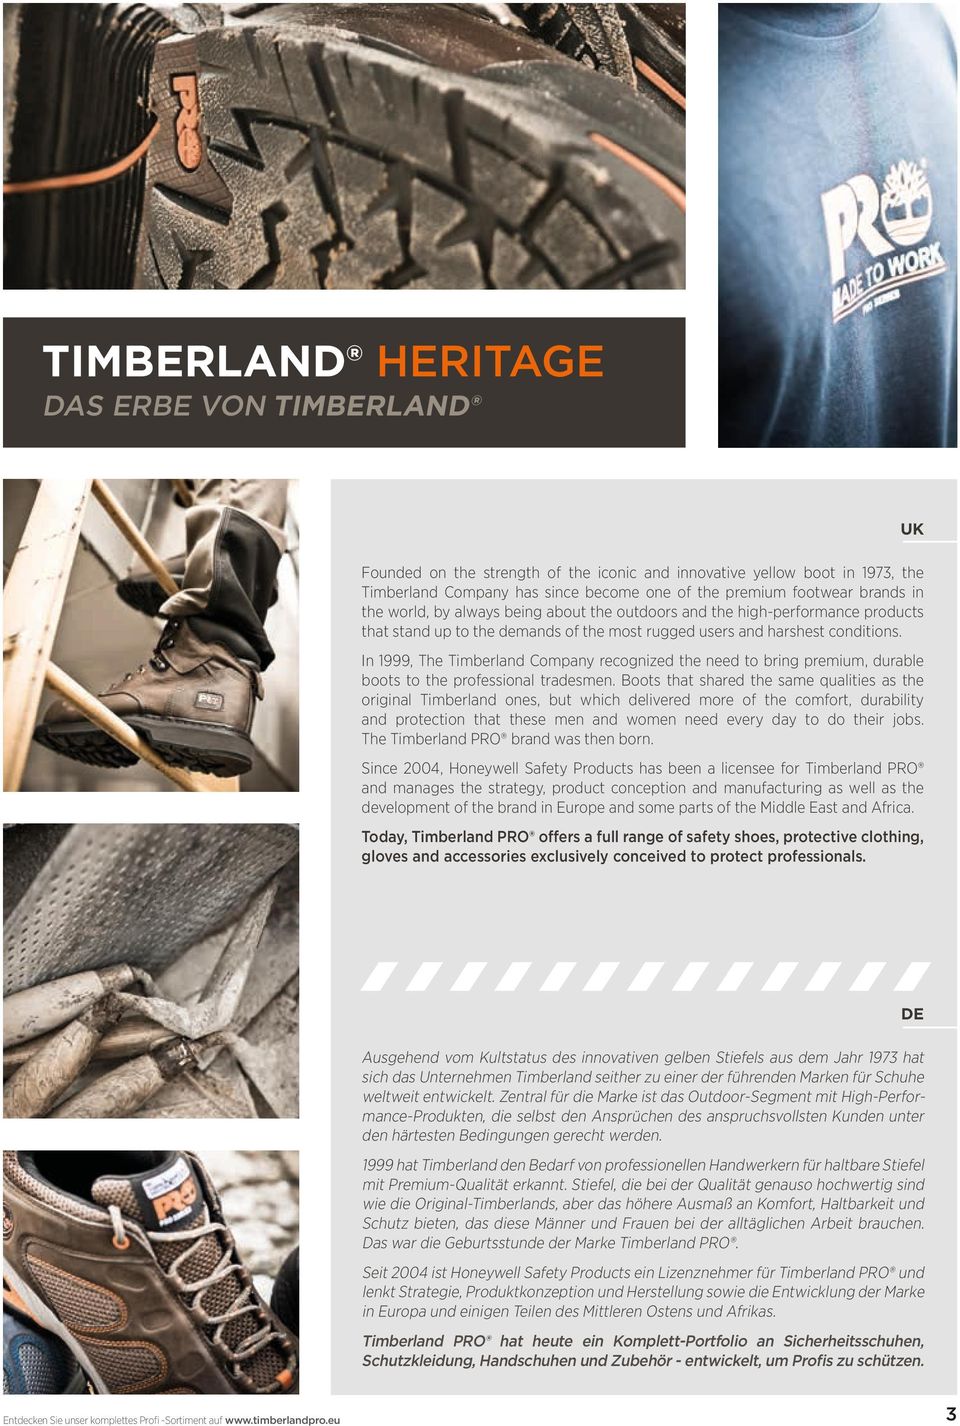 In 1999, The Timberland Company recognized the need to bring premium, durable boots to the professional tradesmen.